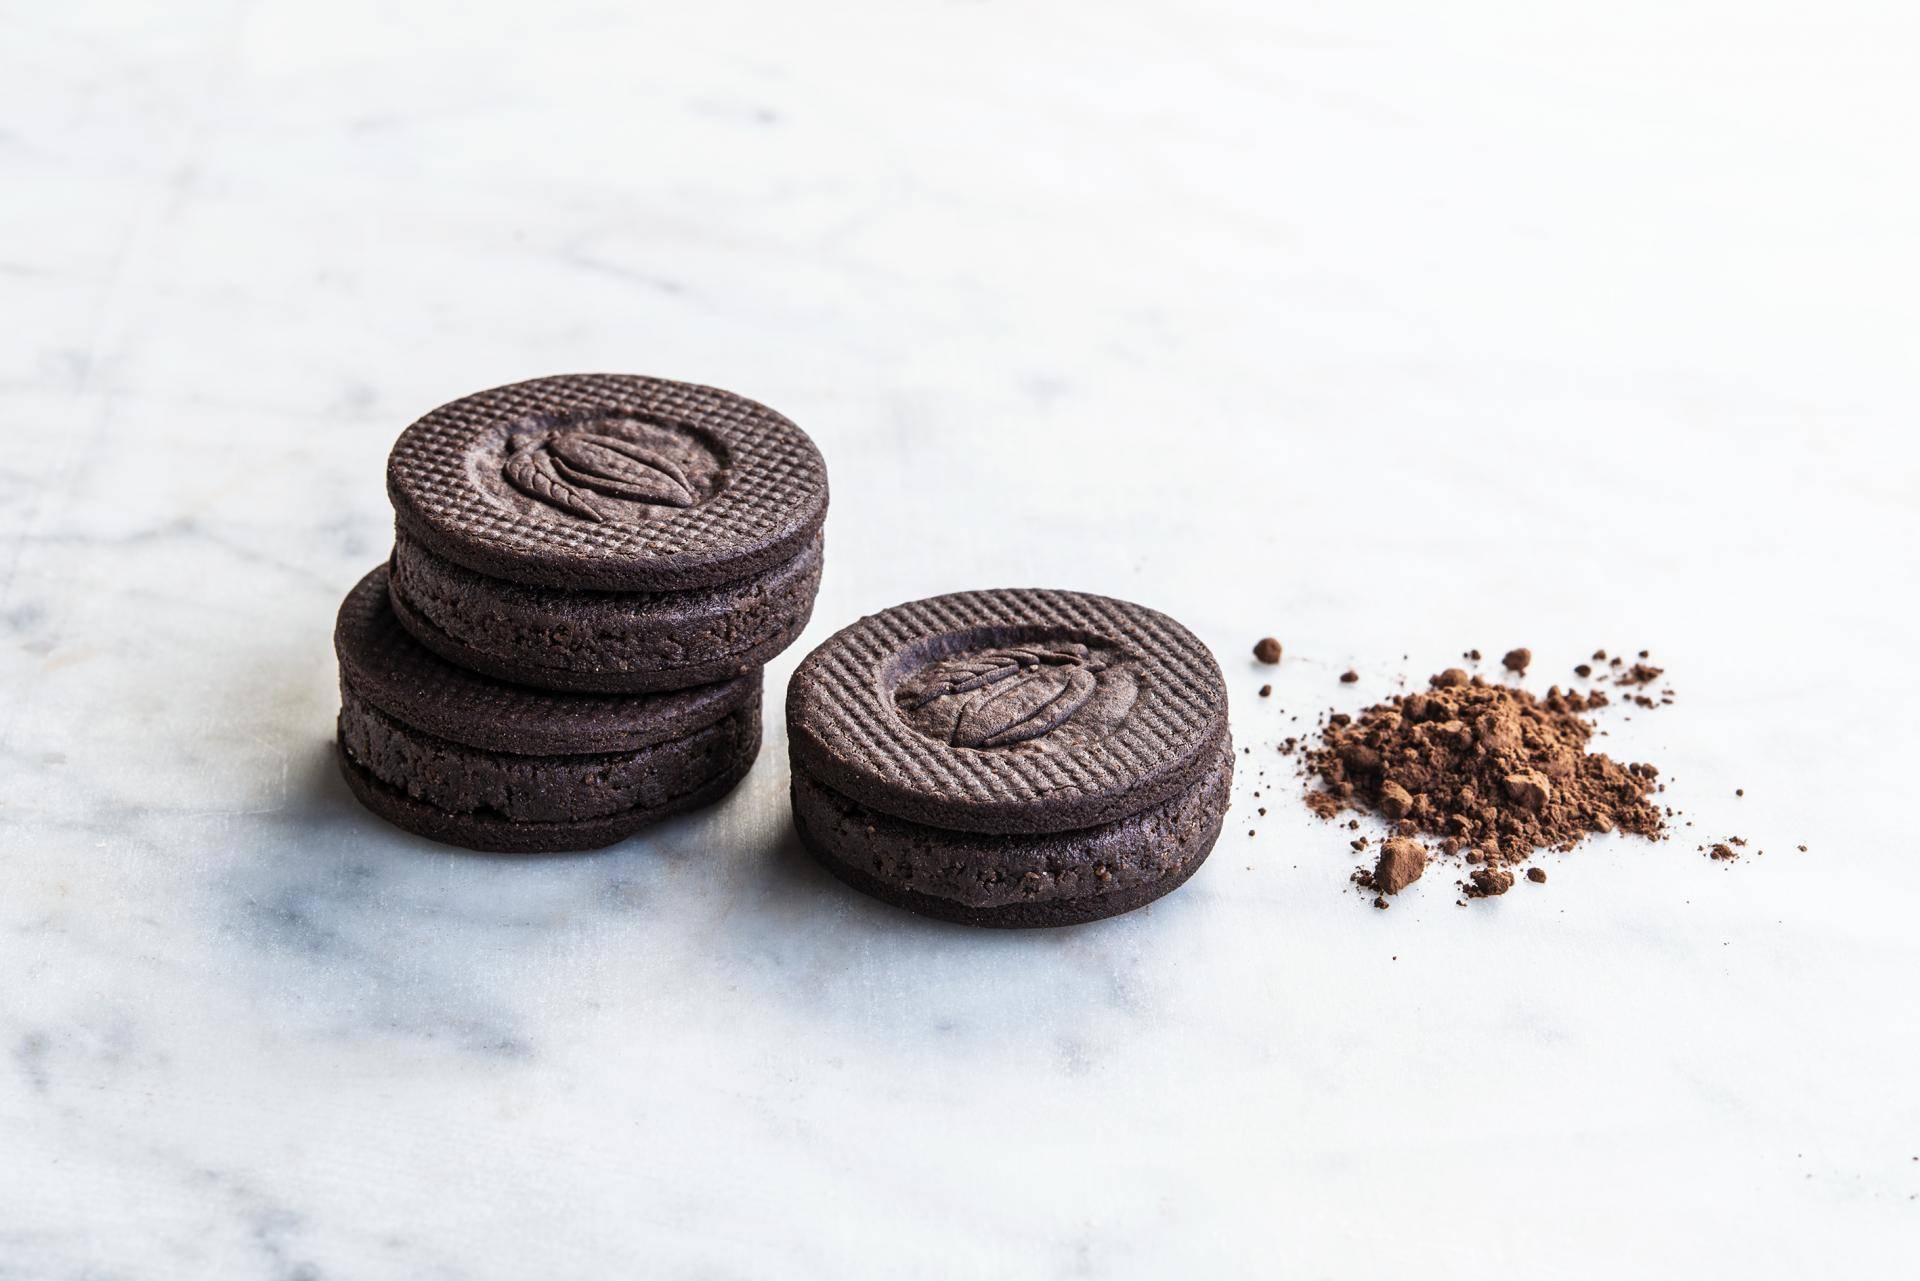 Cookies made with natural dark cocoa powder